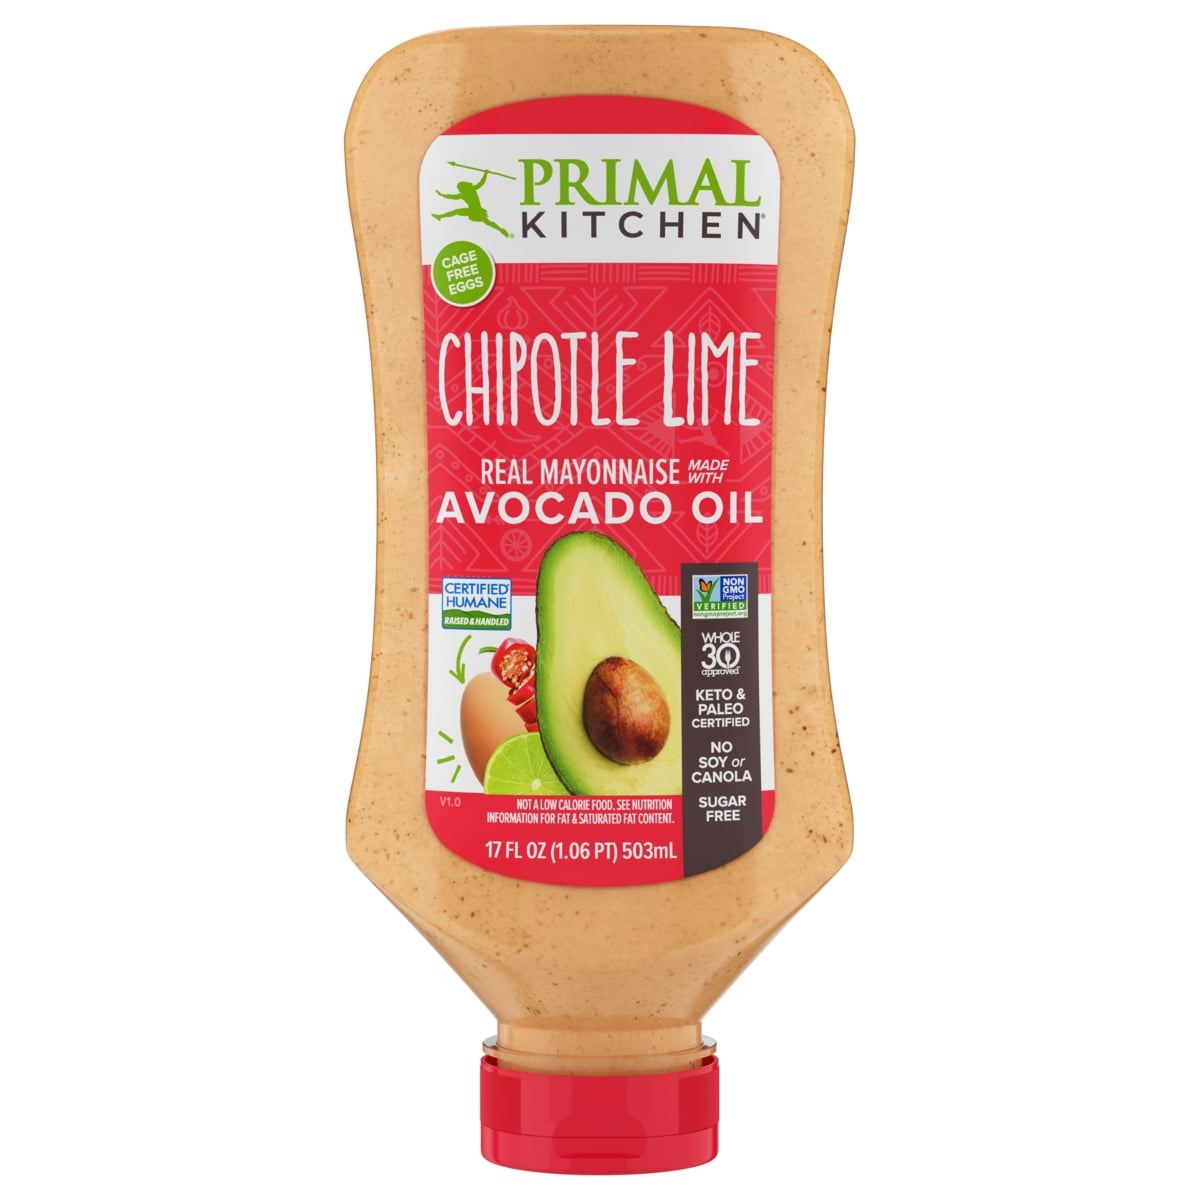 Primal Kitchen Chipotle Lime Mayonnaise Made With Avocado Oil - Case of  6/17 oz